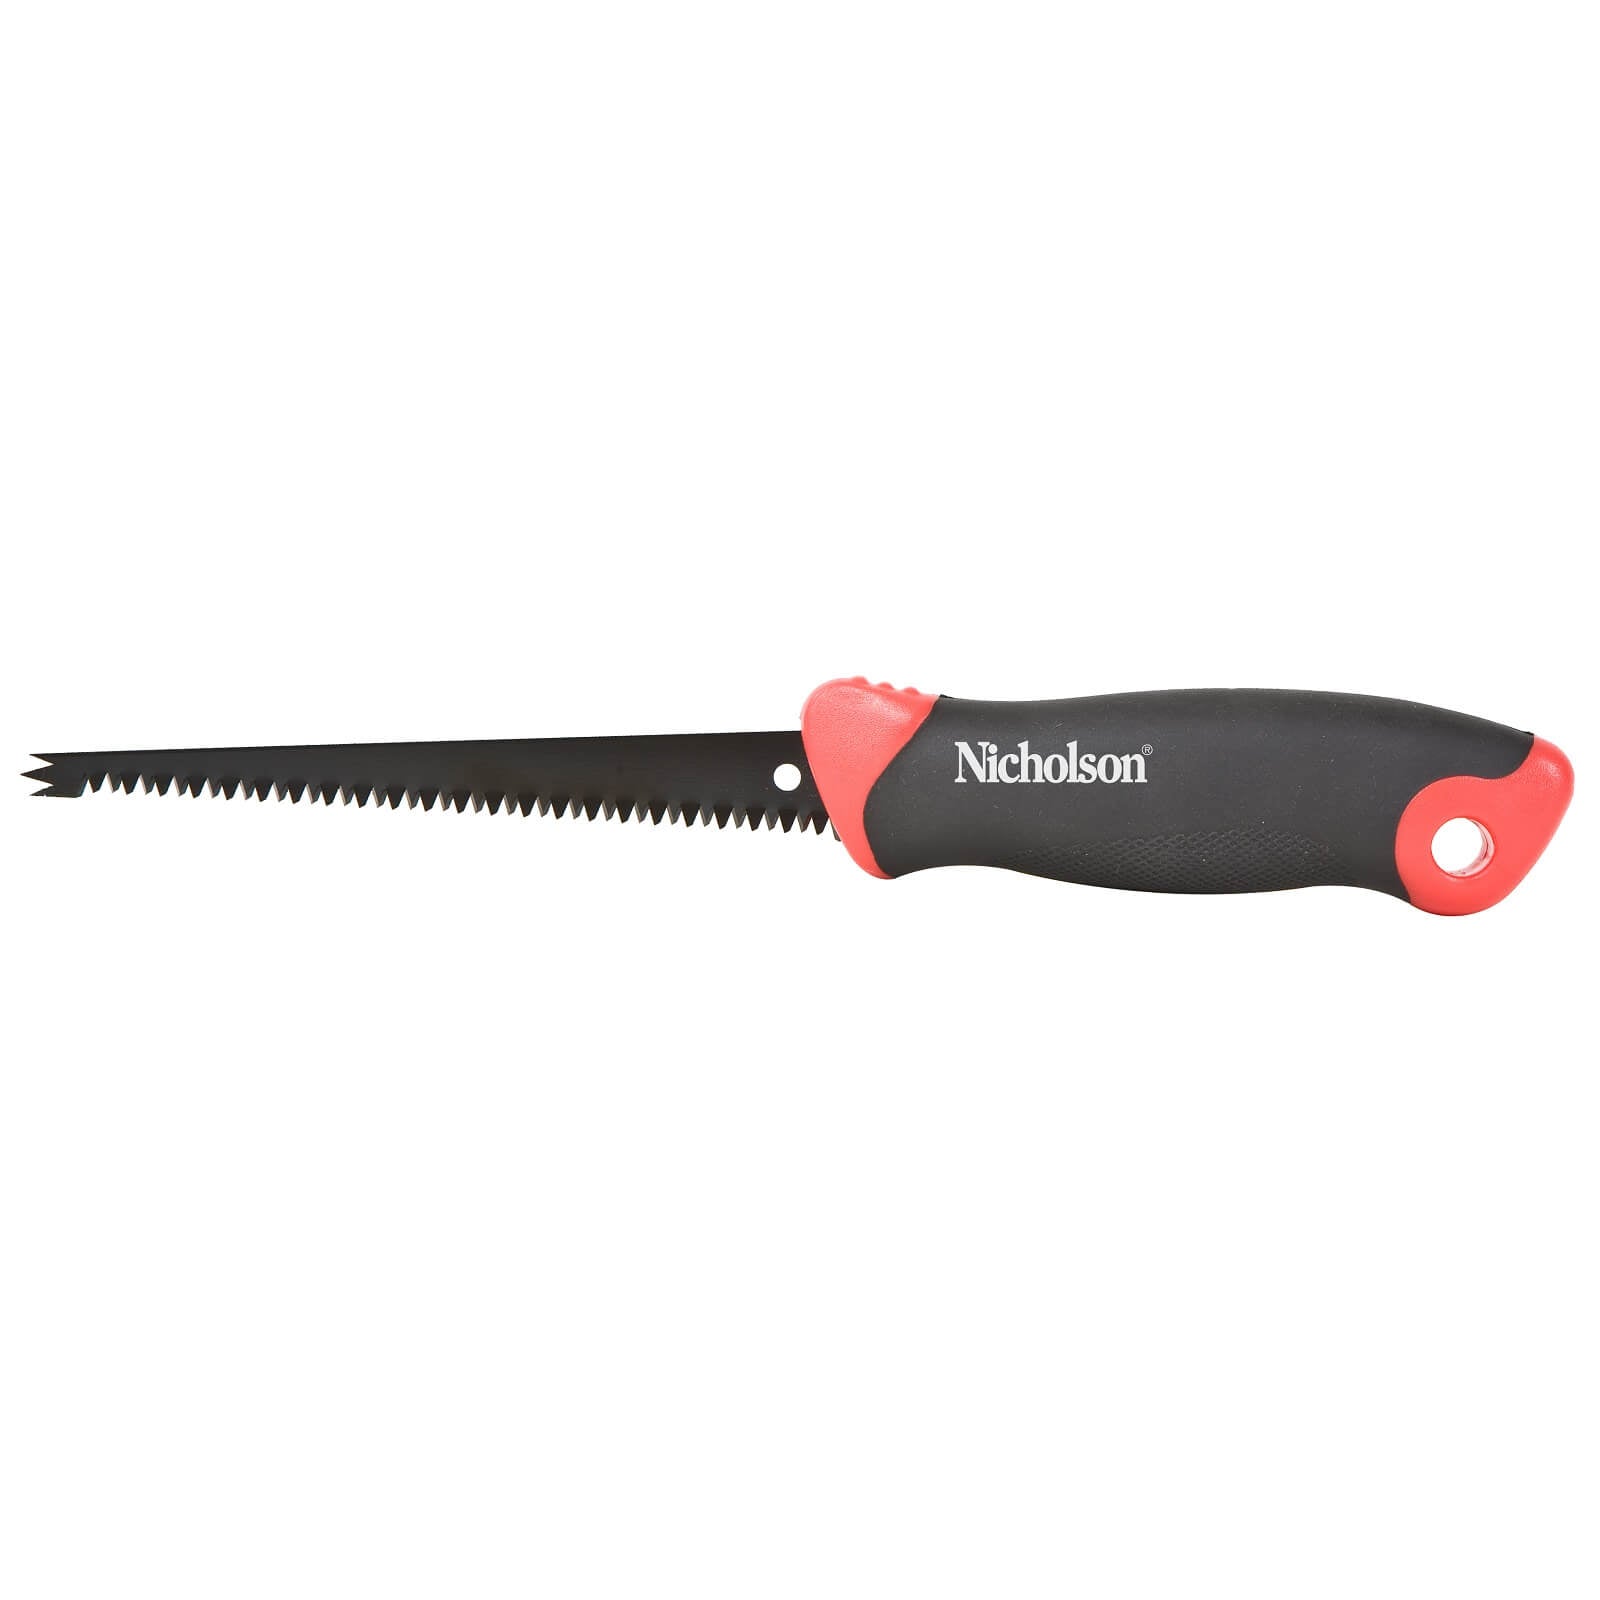 Drywall Plaster Jab Saw Auger Tip - NDWS by Nicholson